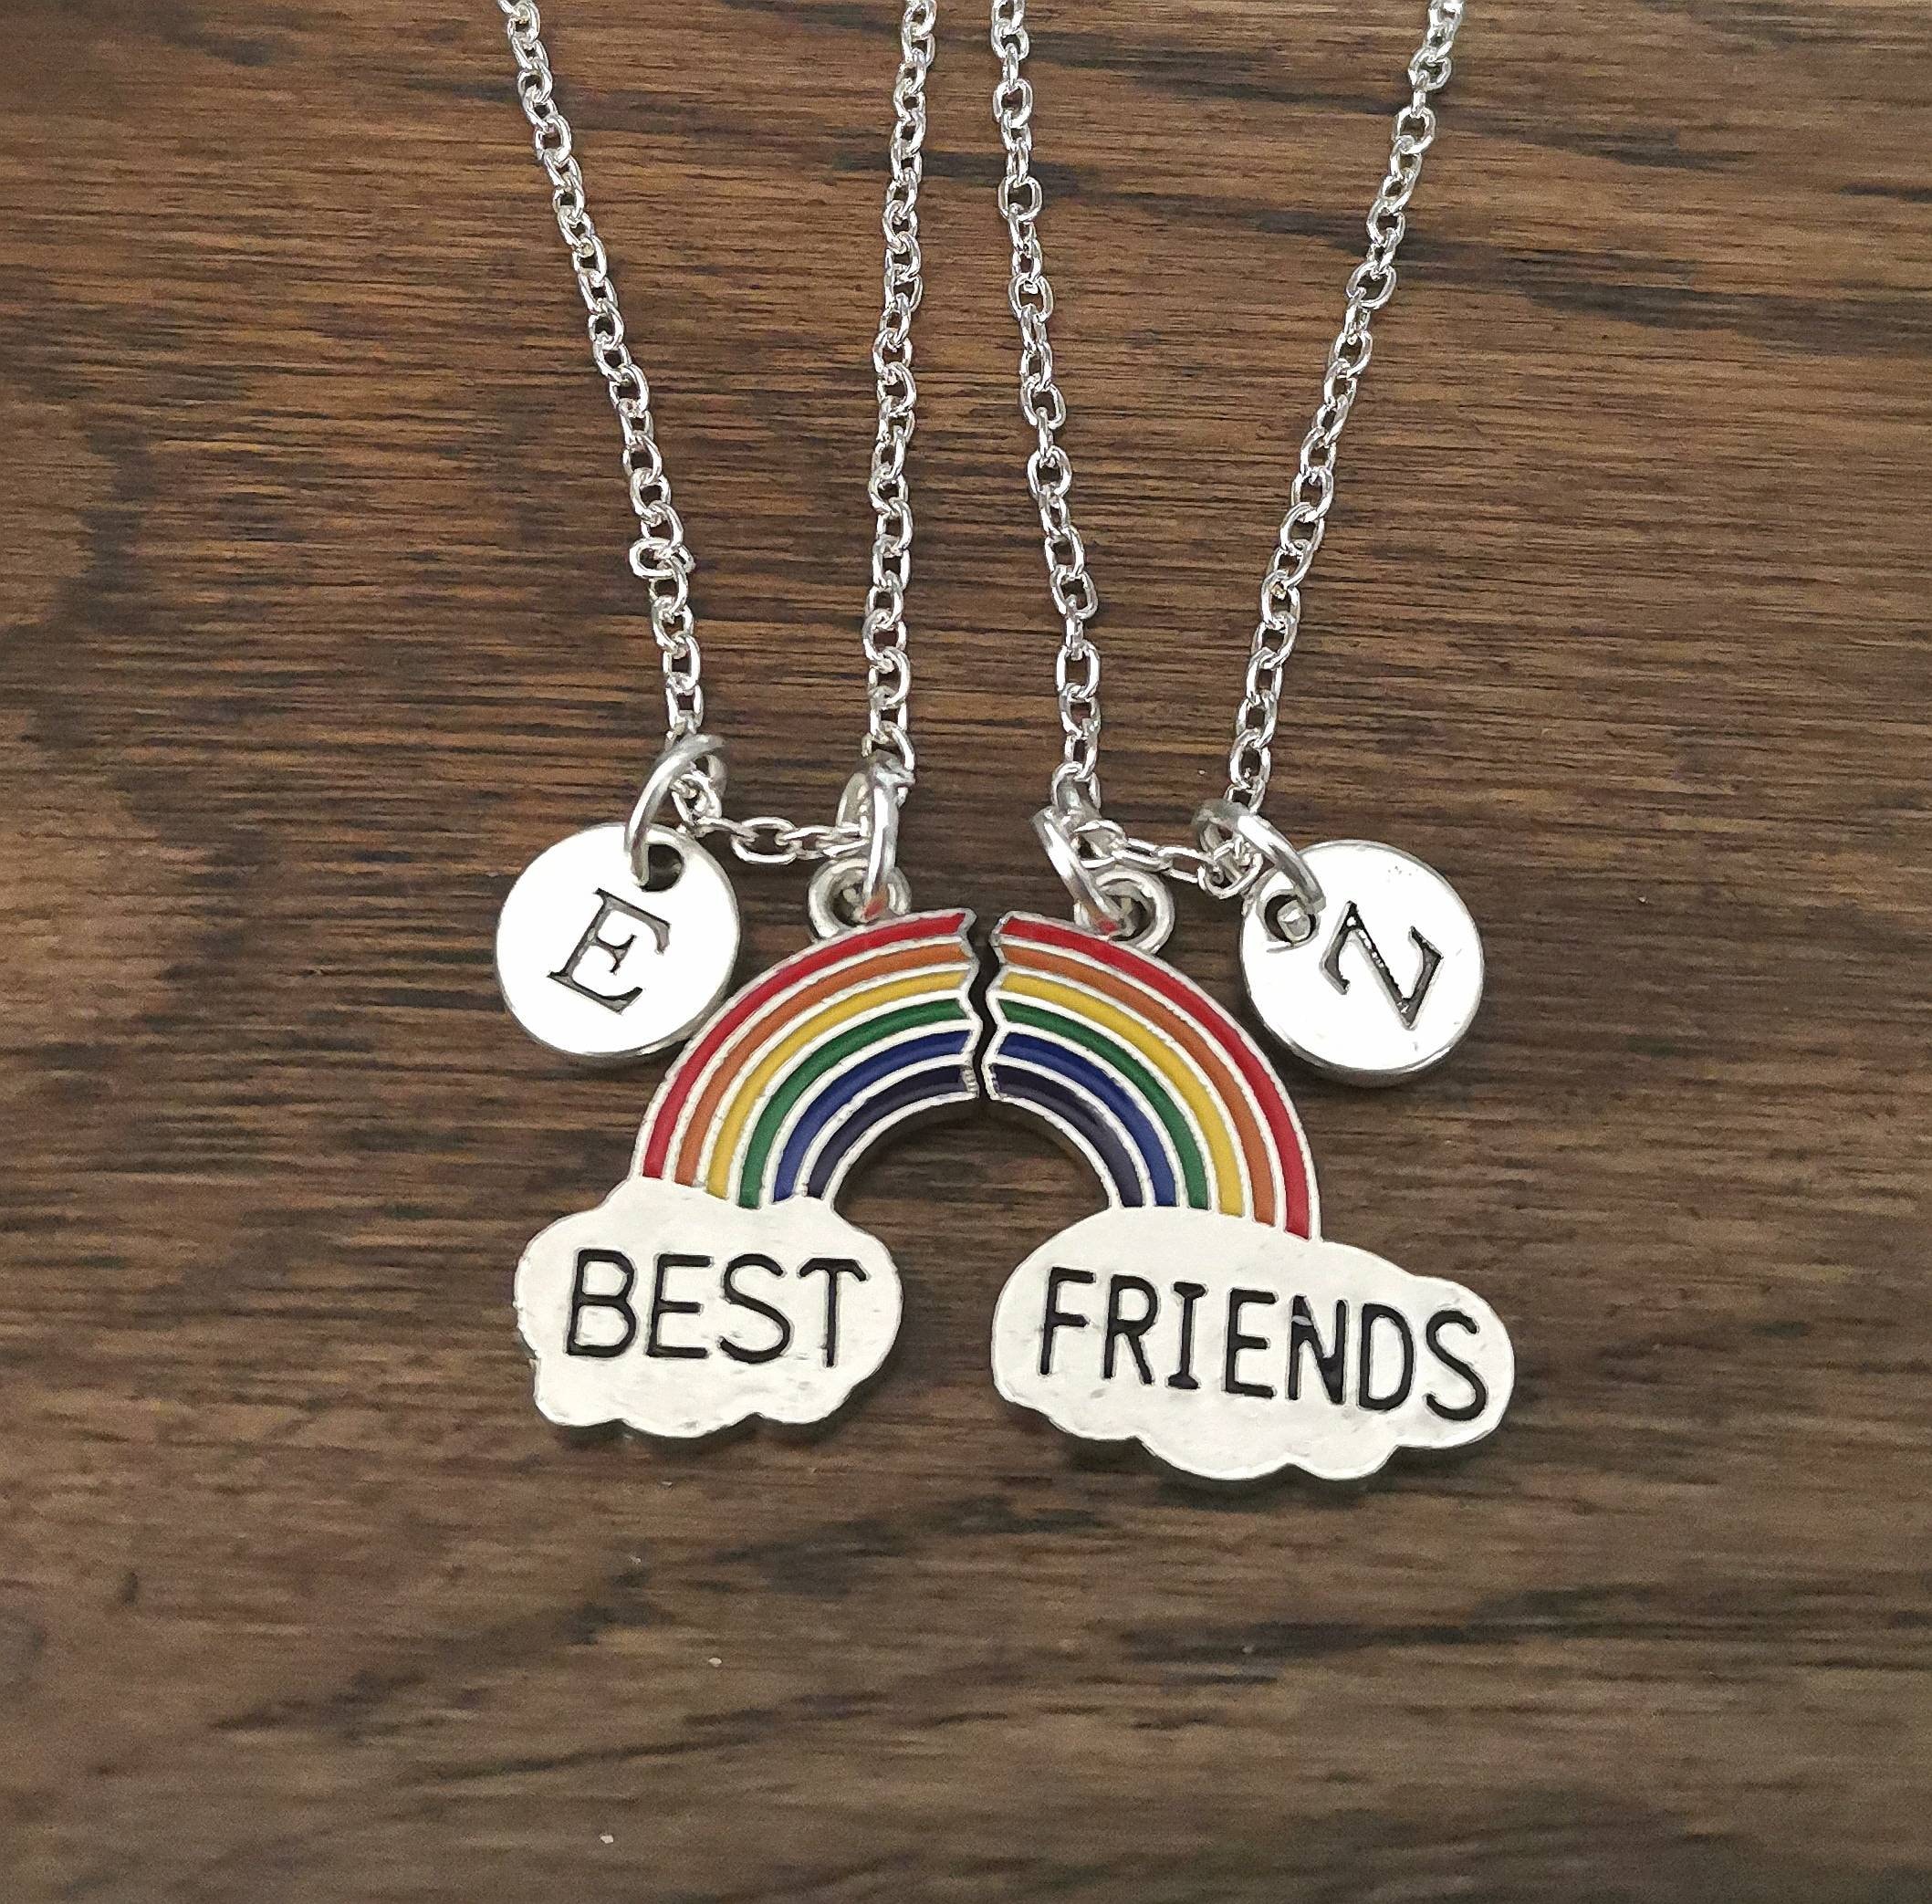 luomart Girls Best Friends Necklace for 2,BFF Friendship Gifts for 2,Rainbow Broken Heart Pendant Jewelry Set for Women 